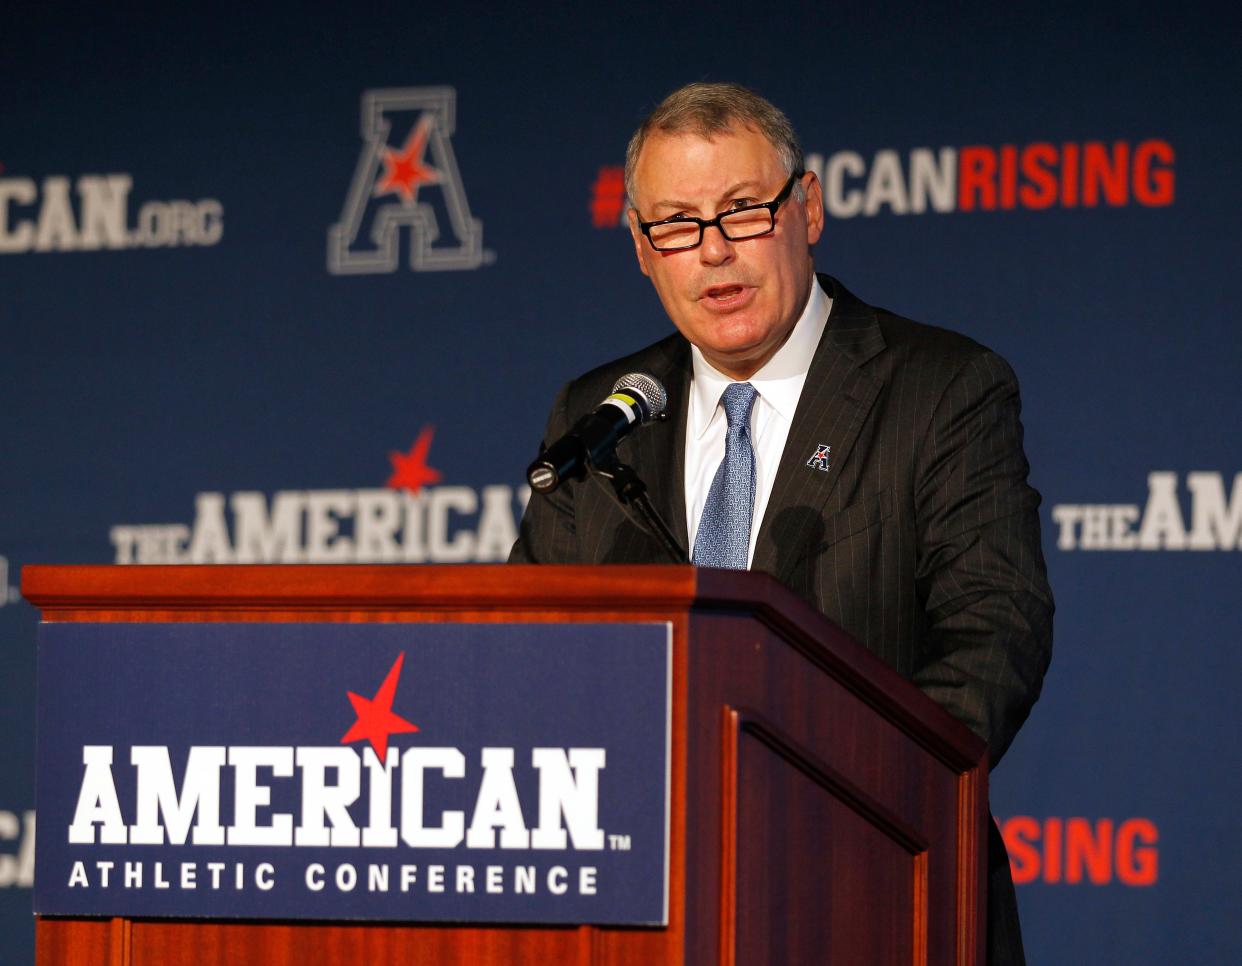 From 2015, outgoing American Athletic Conference commissioner Mike Aresco addressed the press on Media Day. AP